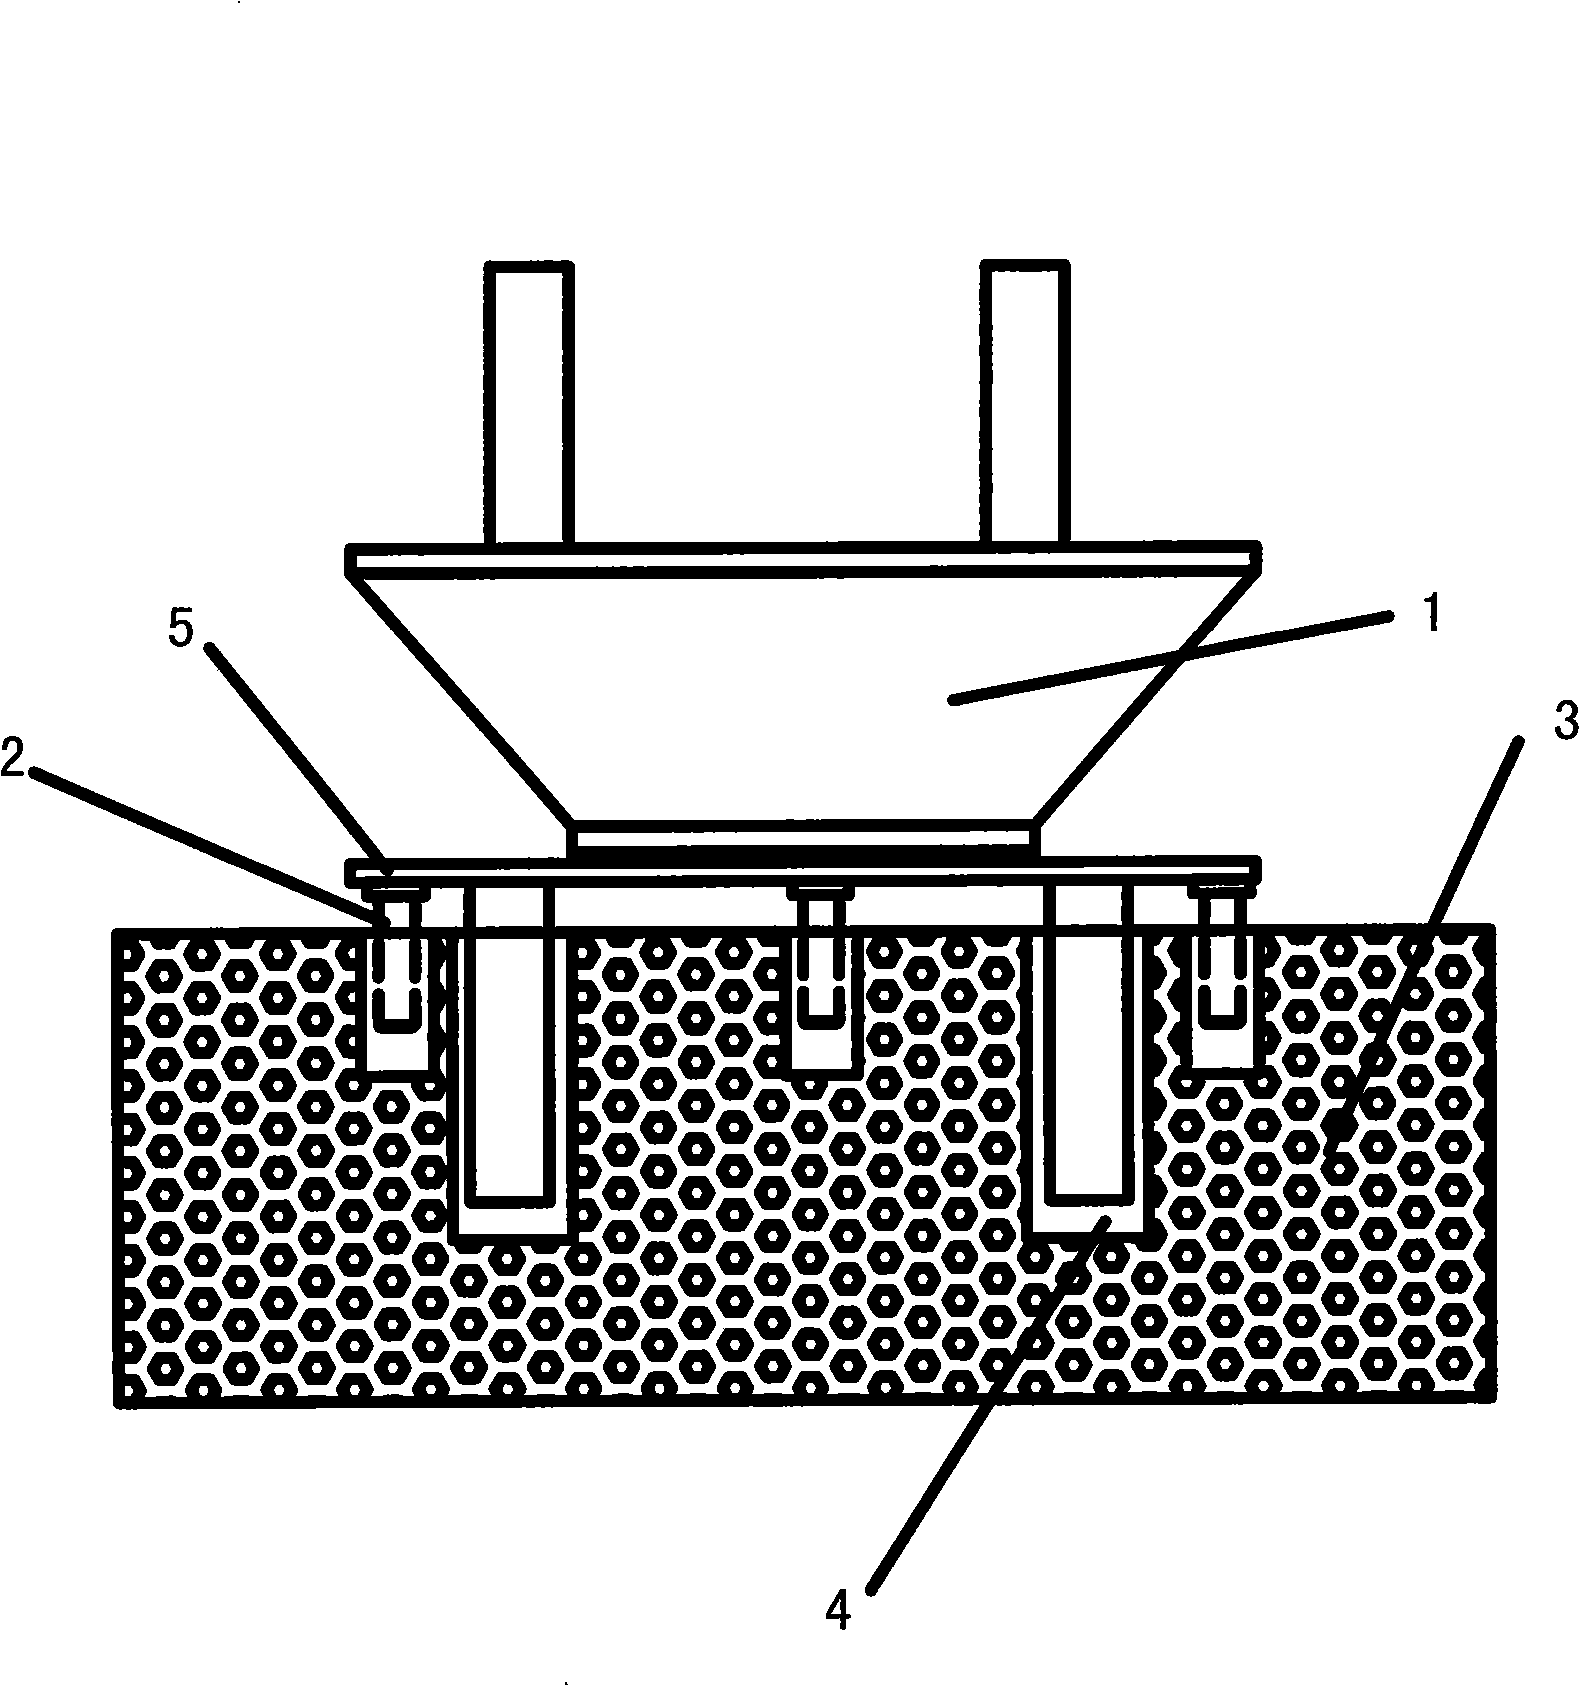 One-time leveling method for installation of large bridge support